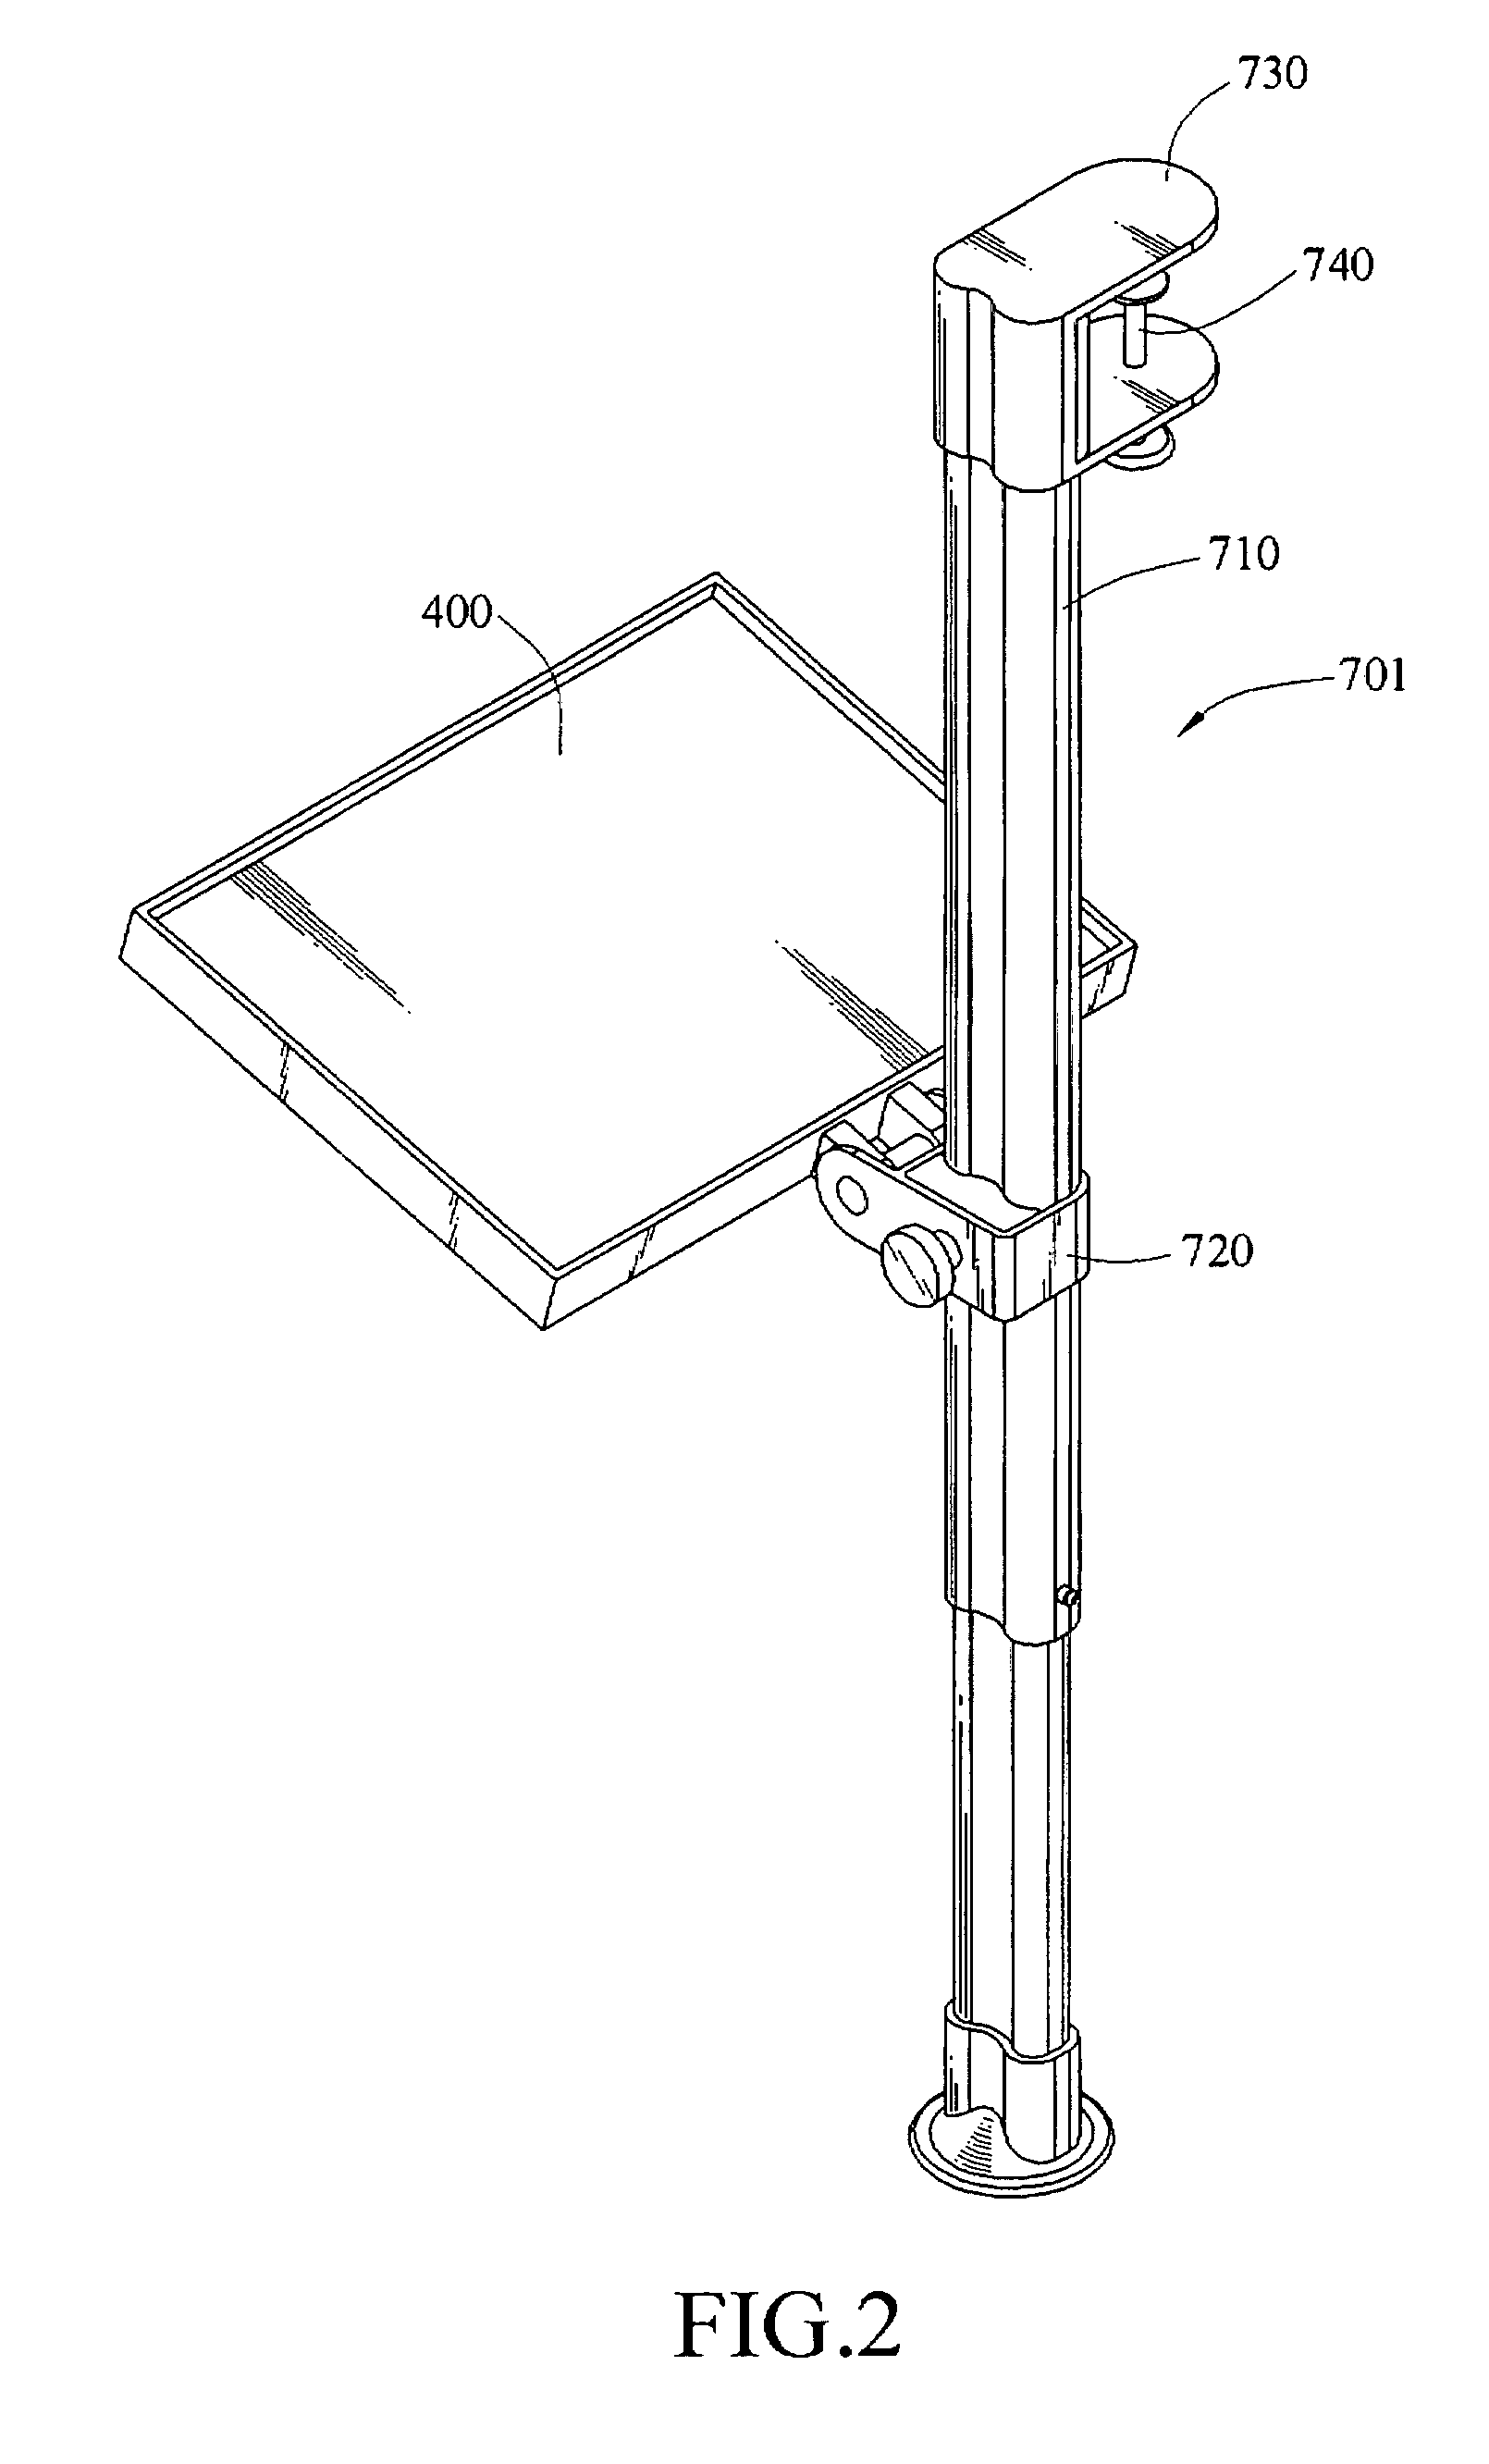 Supporting device for placing an electronic device